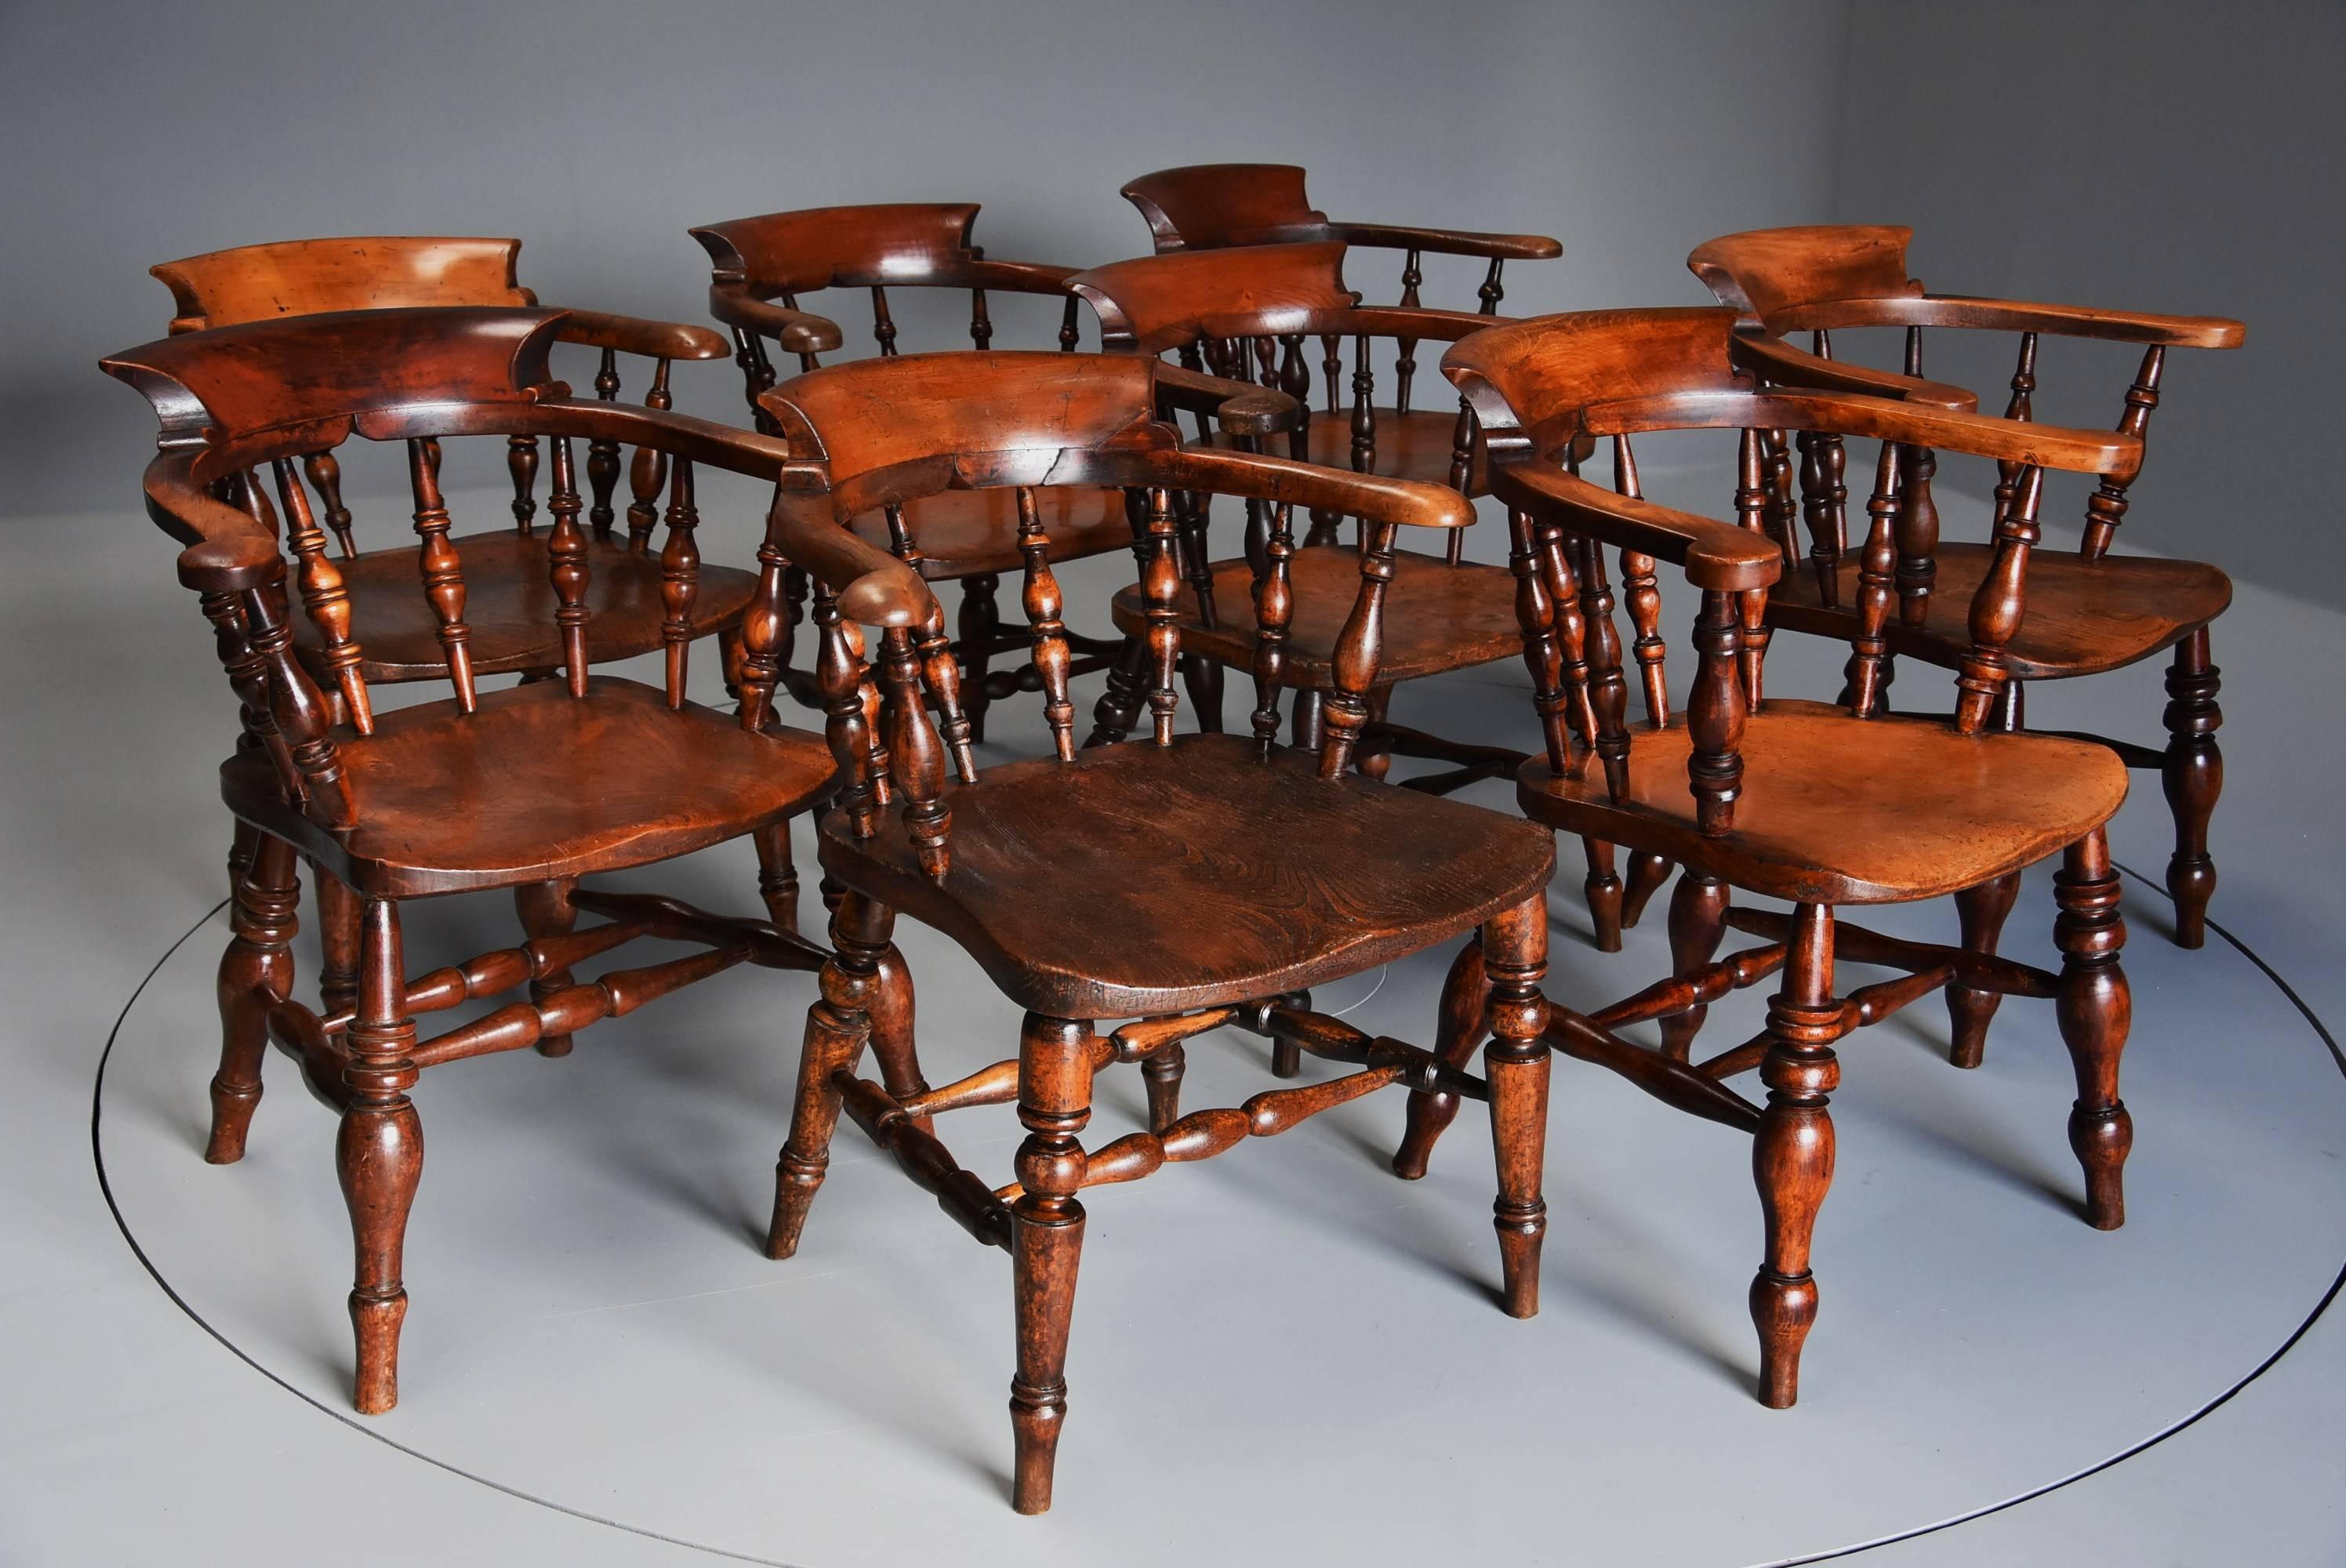 Ash Large Matched Set of Eight Mid-19th Century Smokers Bow Chairs or Office Chairs